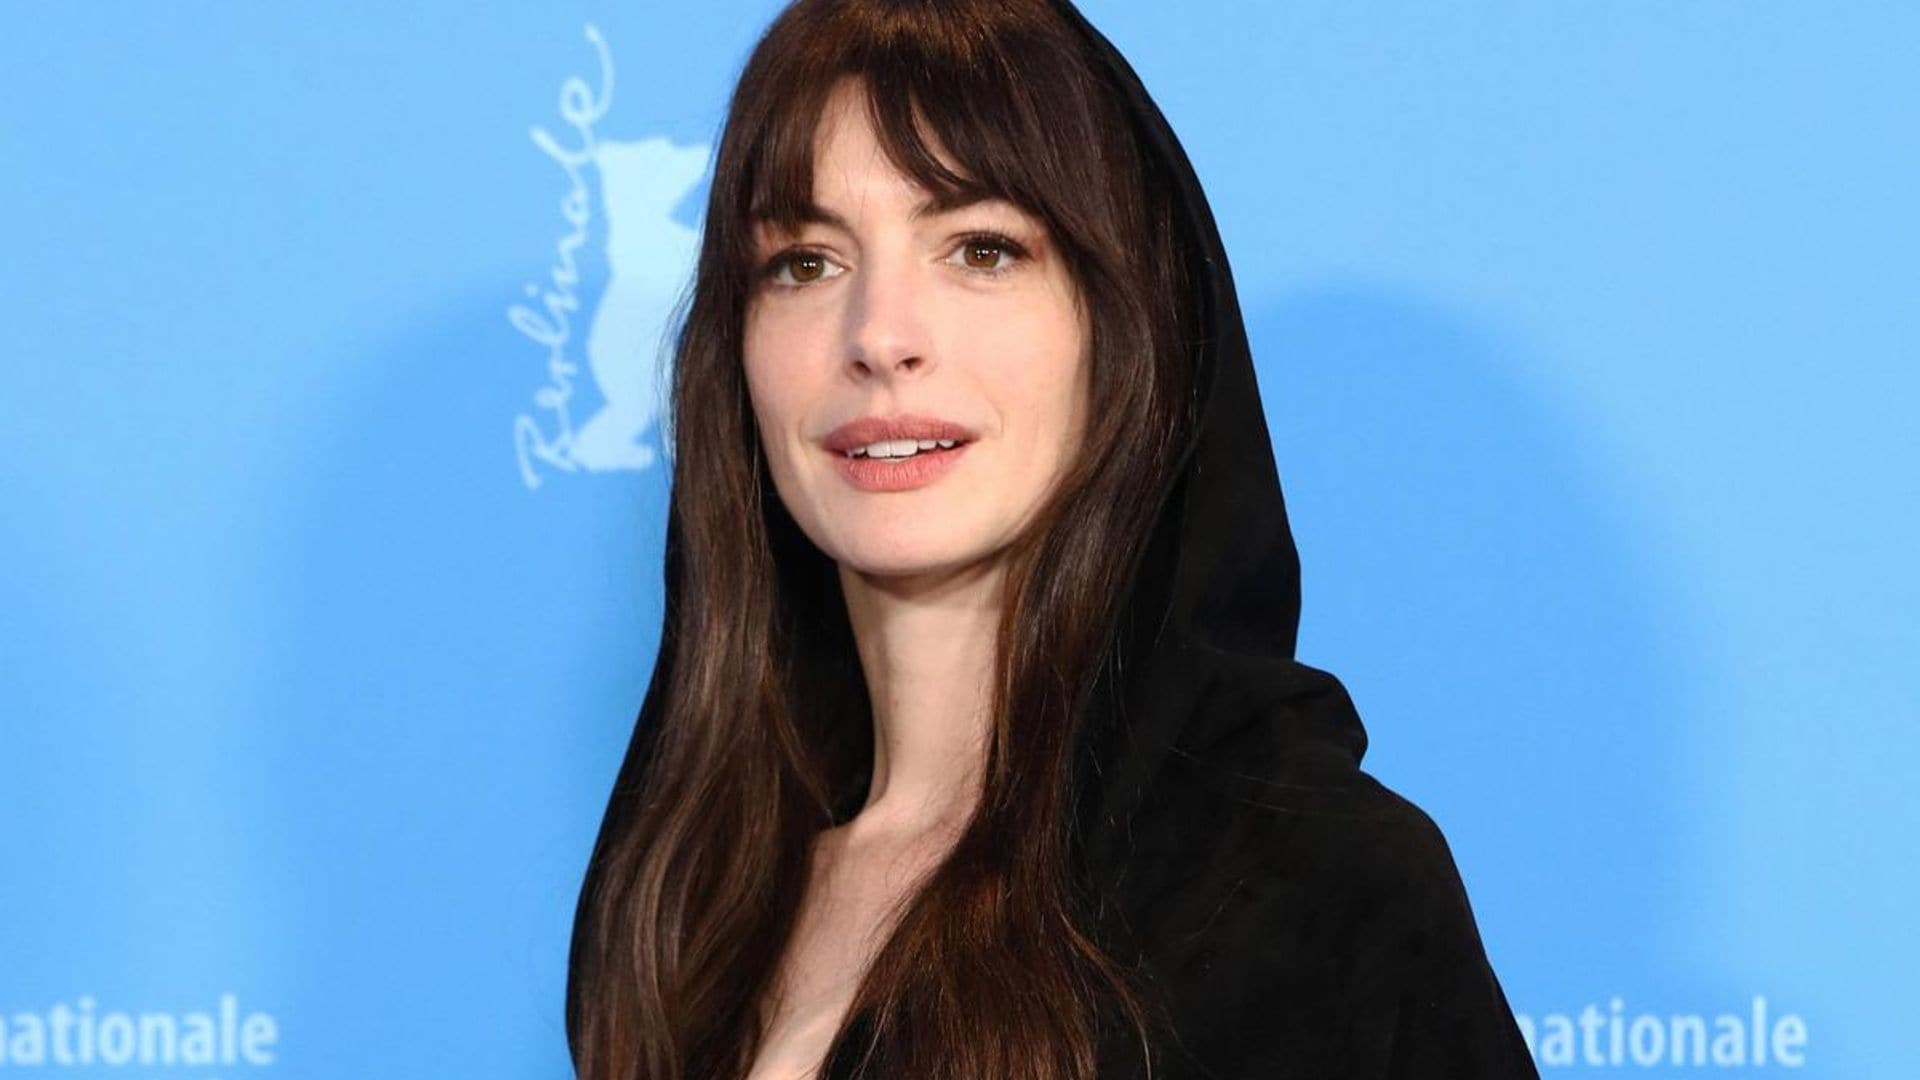 Anne Hathaway is becoming a pop star in upcoming film ‘Mother Mary’